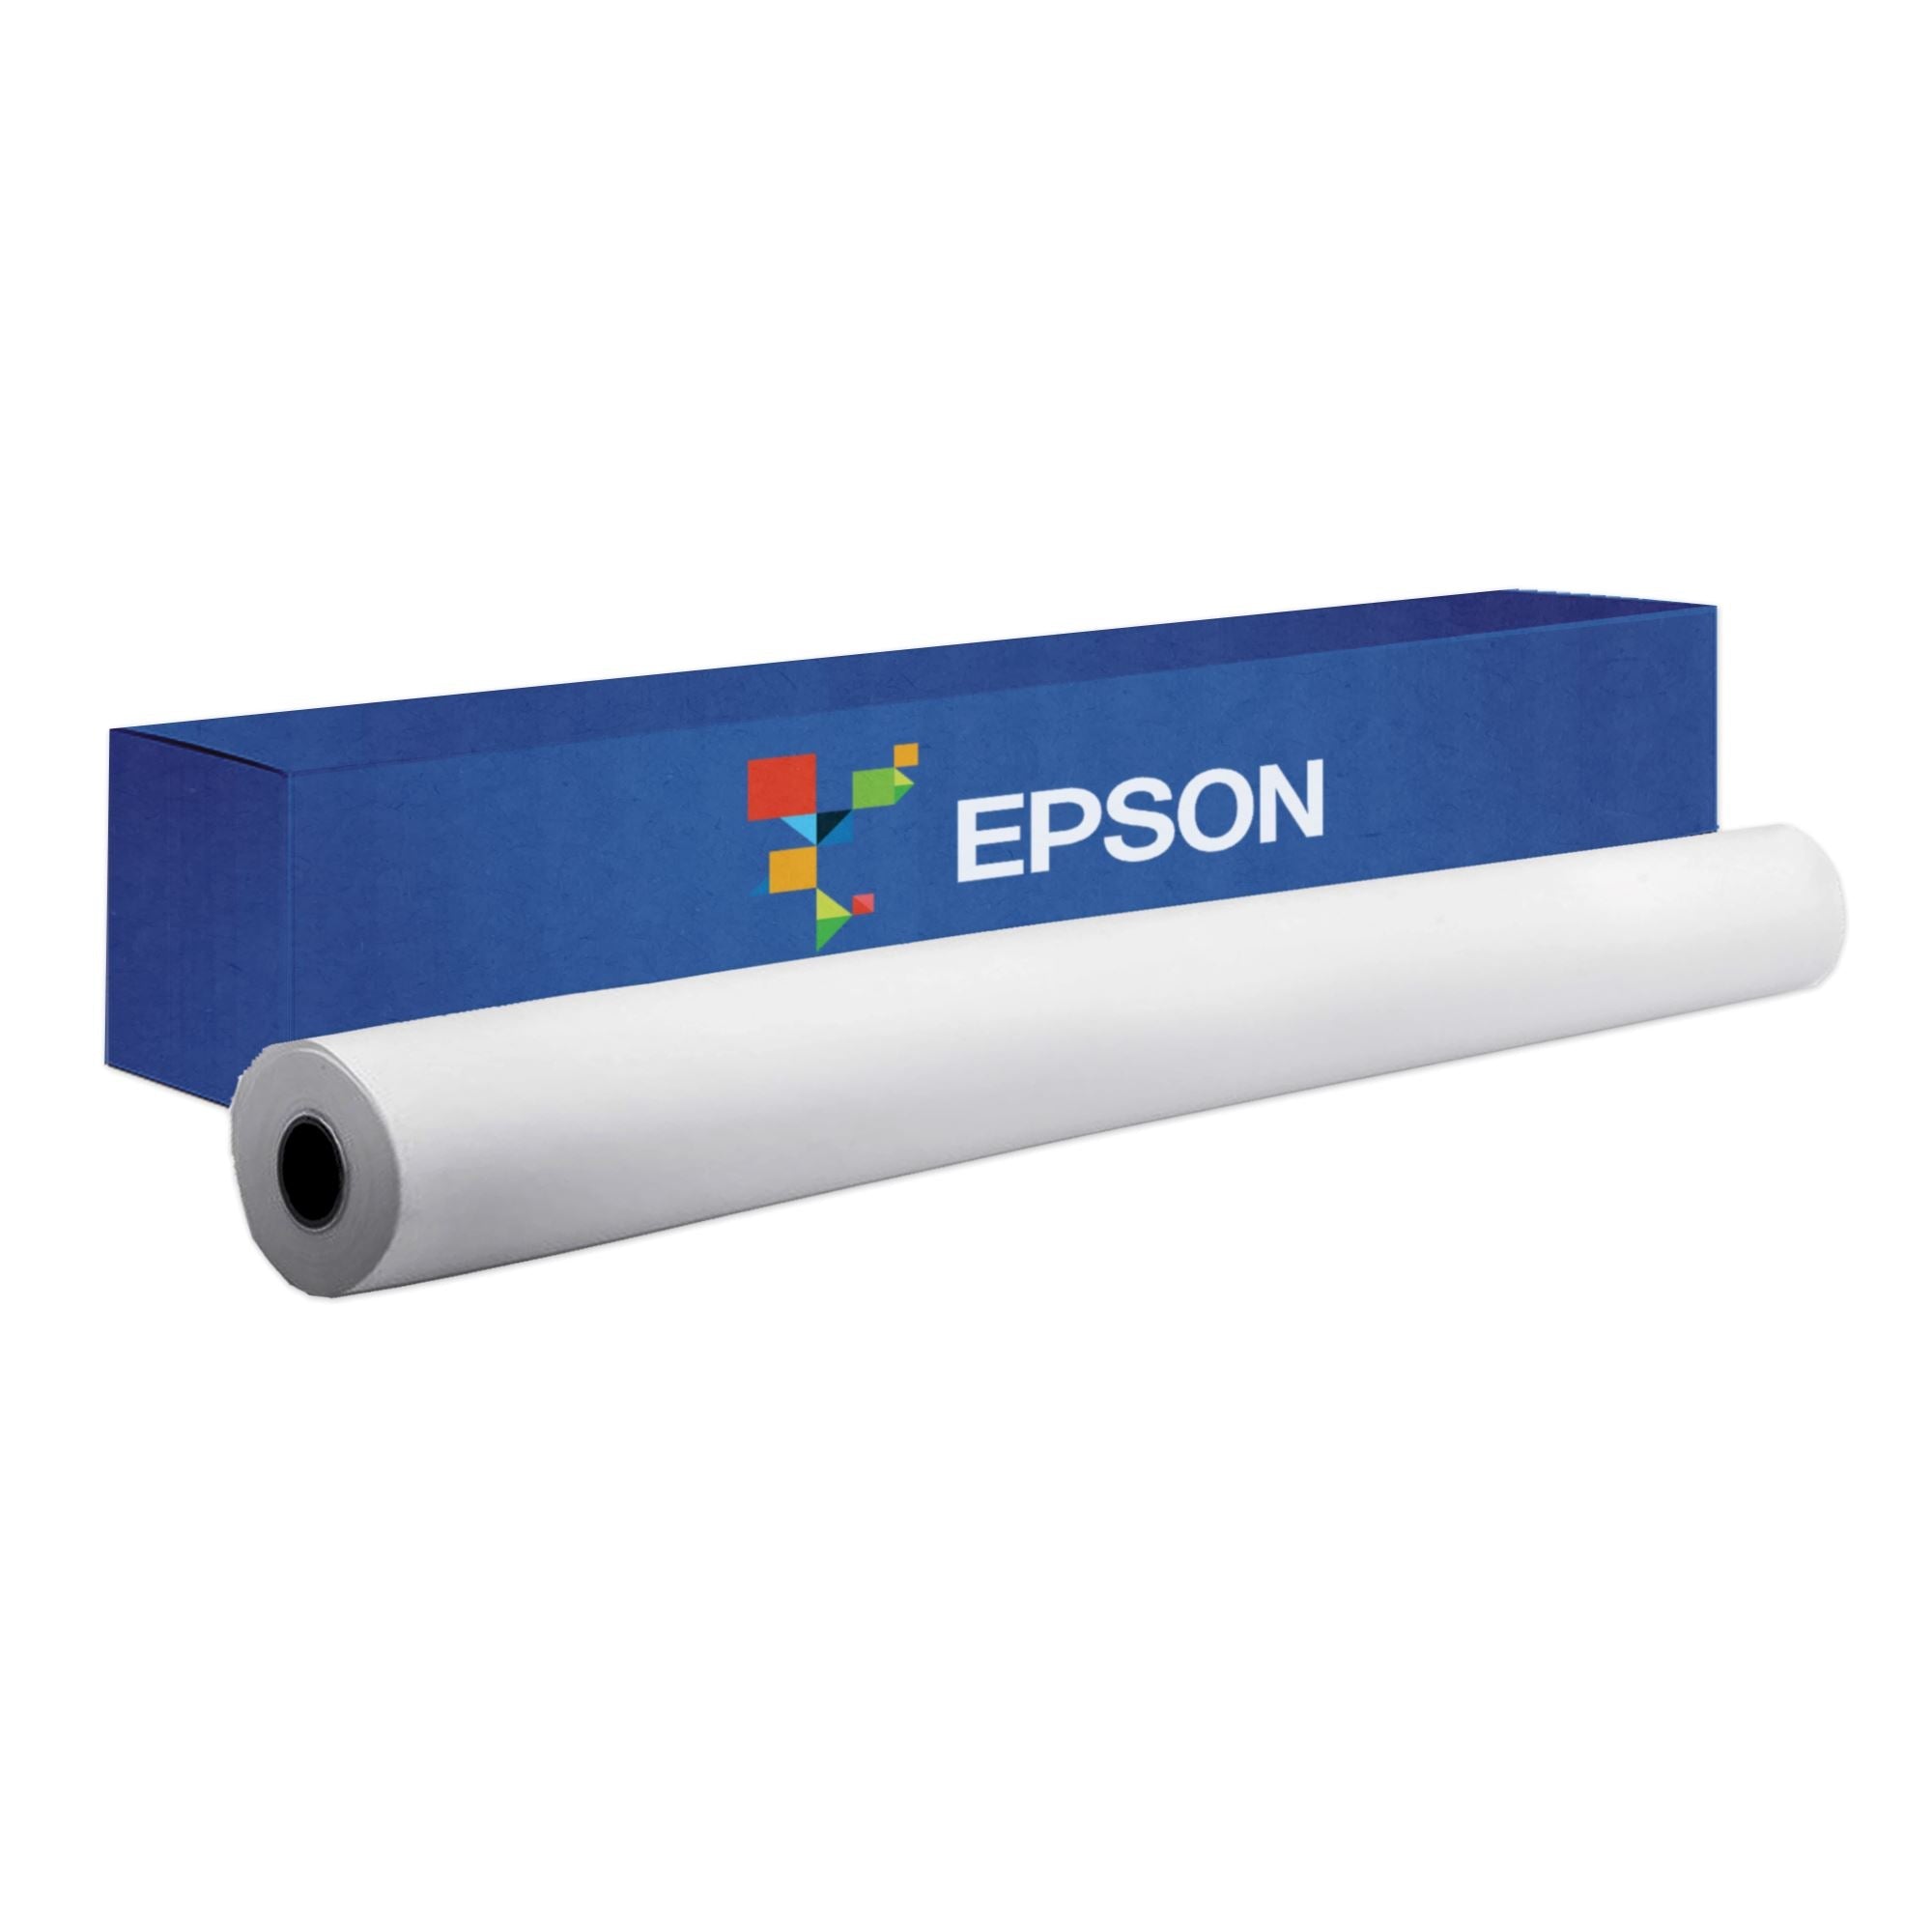 Epson S450359 DS Transfer Multi-Use Paper - 17 x 100 ft. Roll